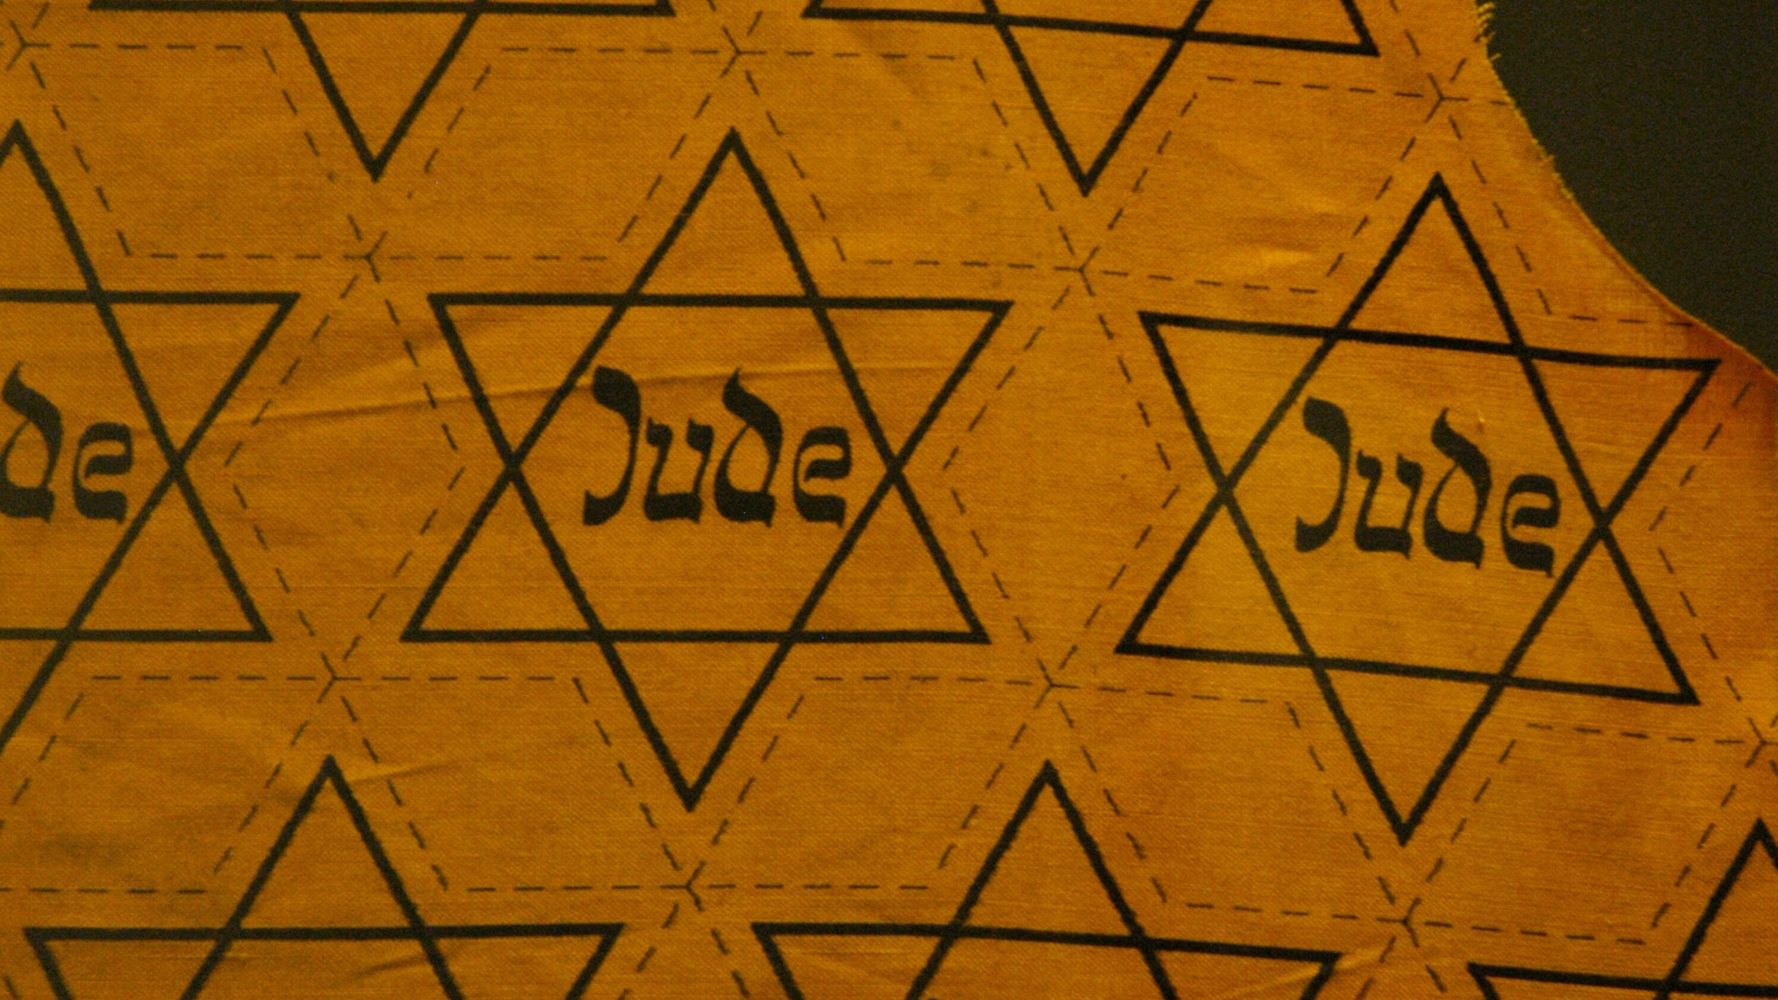 Anchorage Mayor Defends Use Of Yellow Stars Of David To Protest Mask Mandates